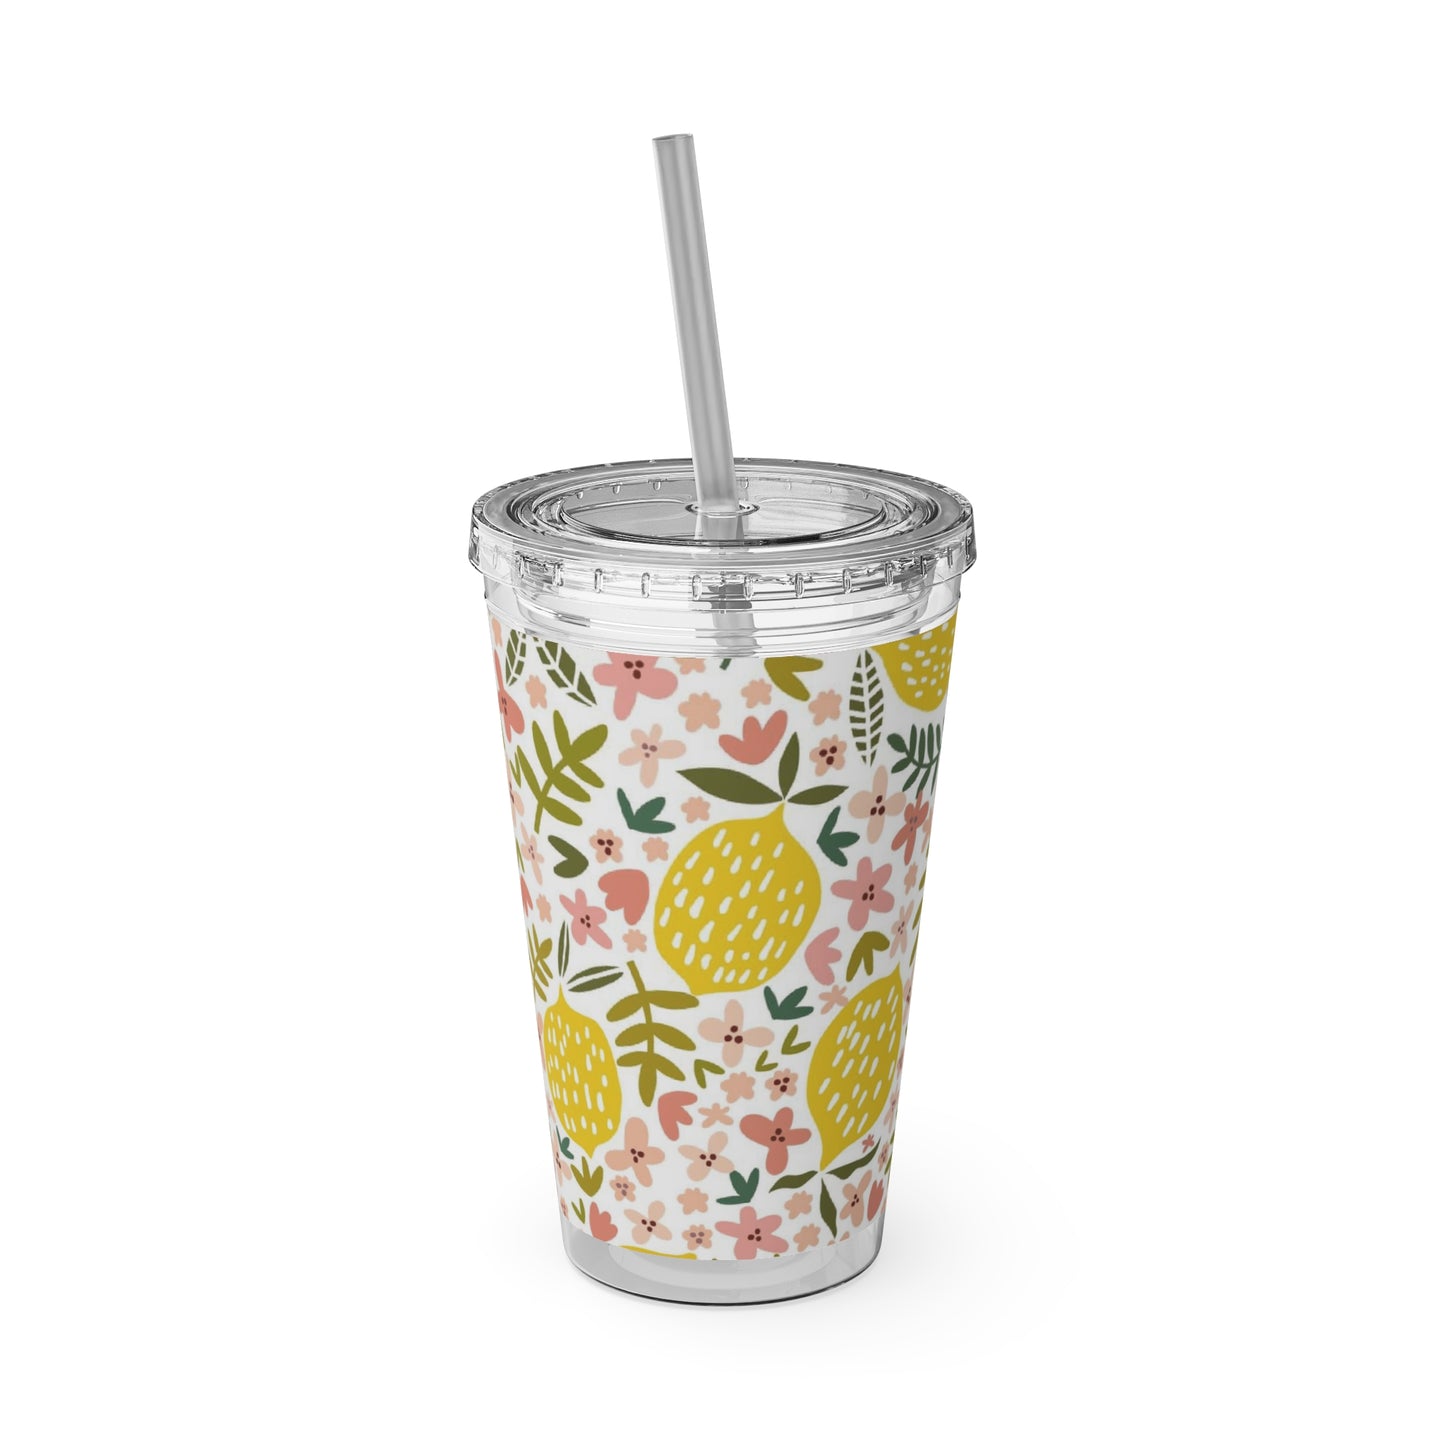 A Pink Lemons tumbler with a straw and a floral pattern.